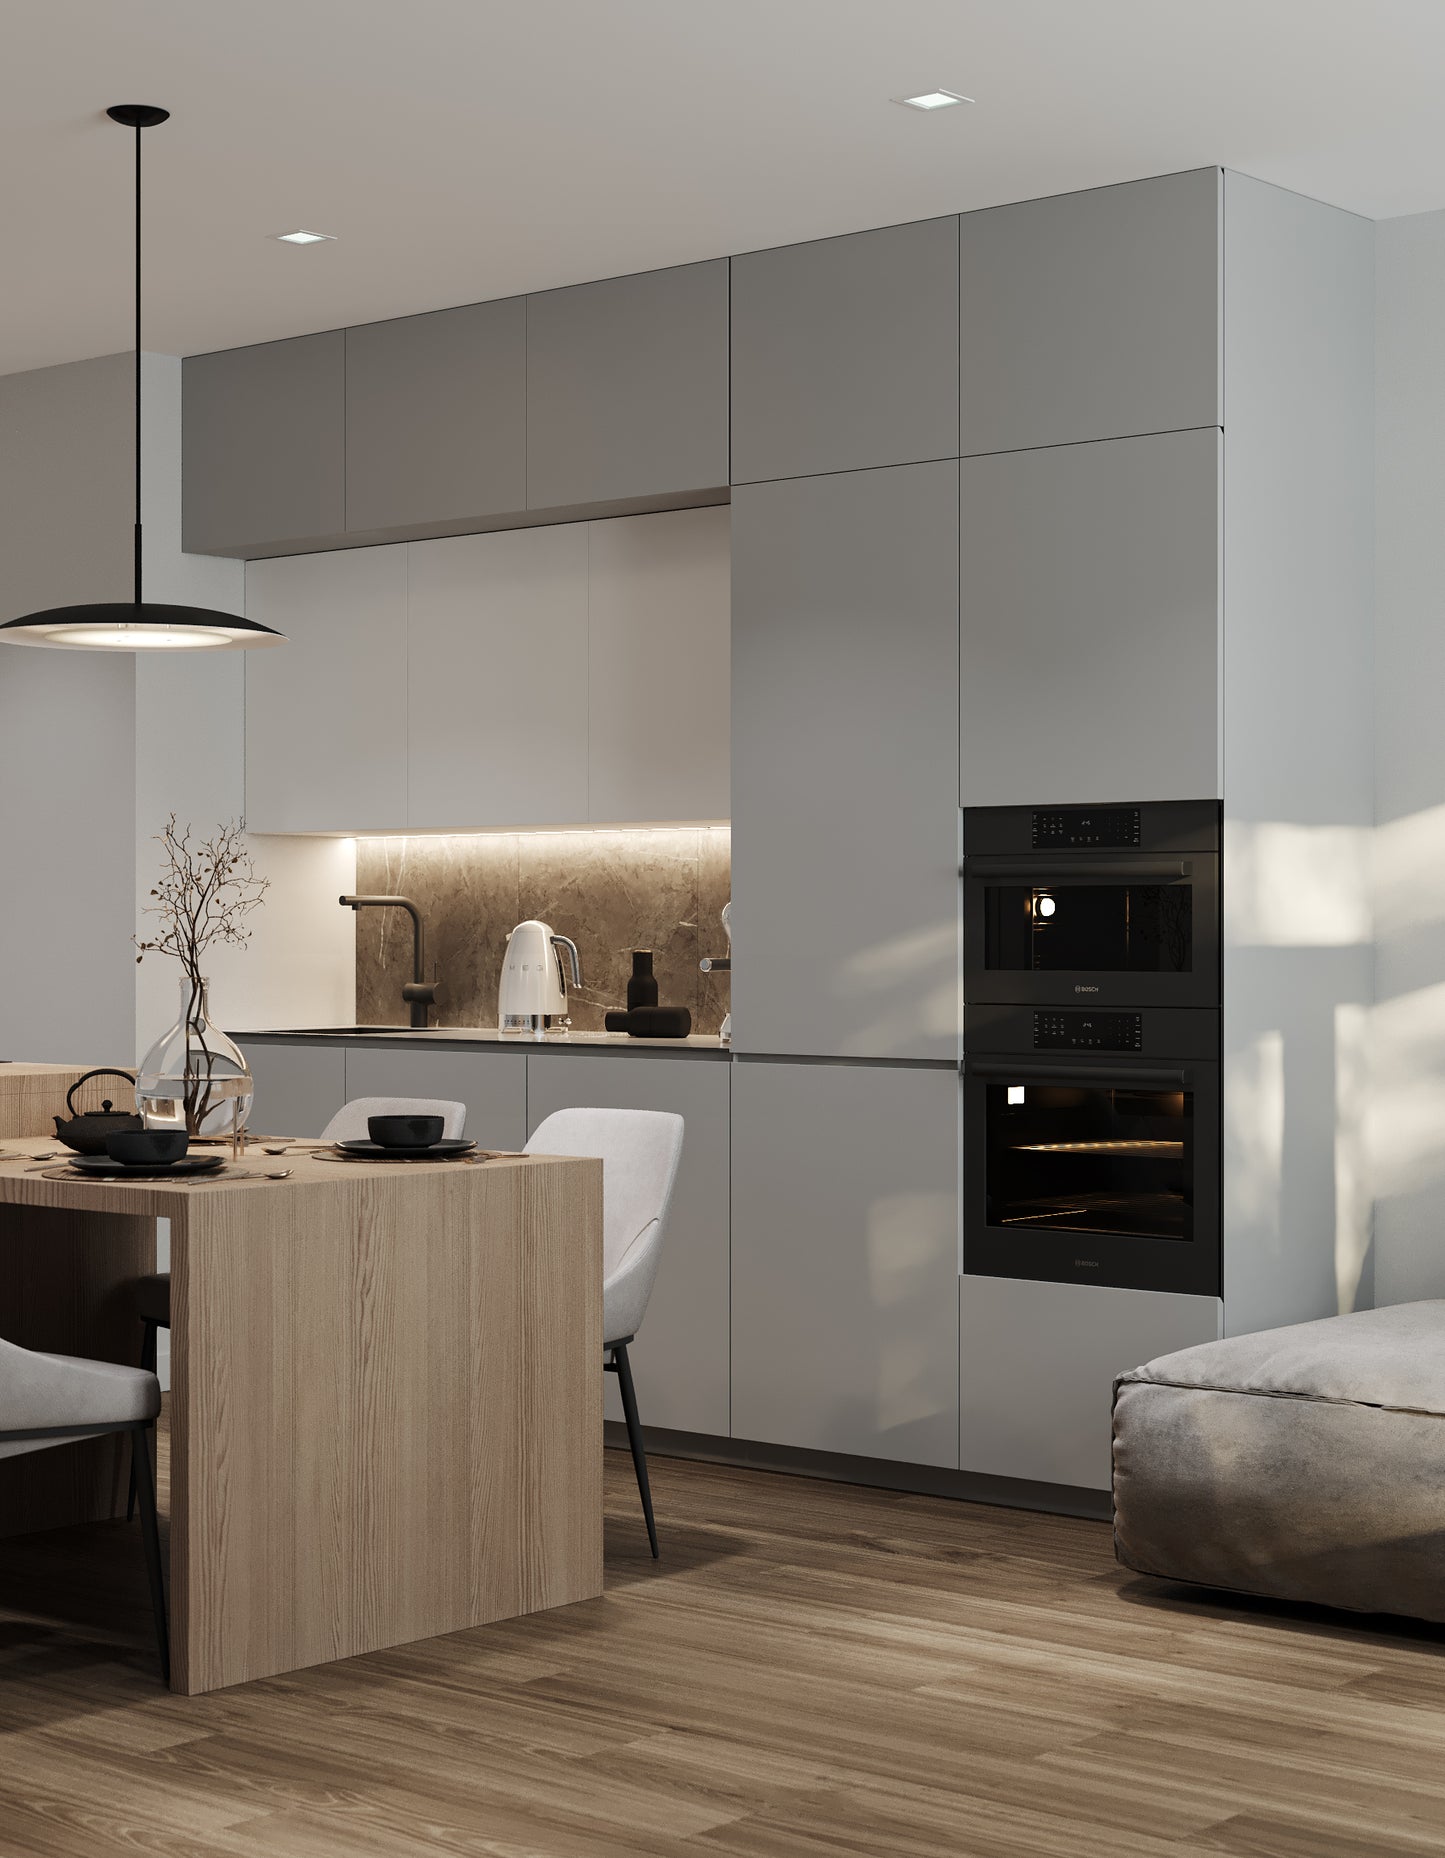 Sleek Grey Sophistication: Modern Kitchen with Top-Quality Painted Fronts and Natural Wood Elements